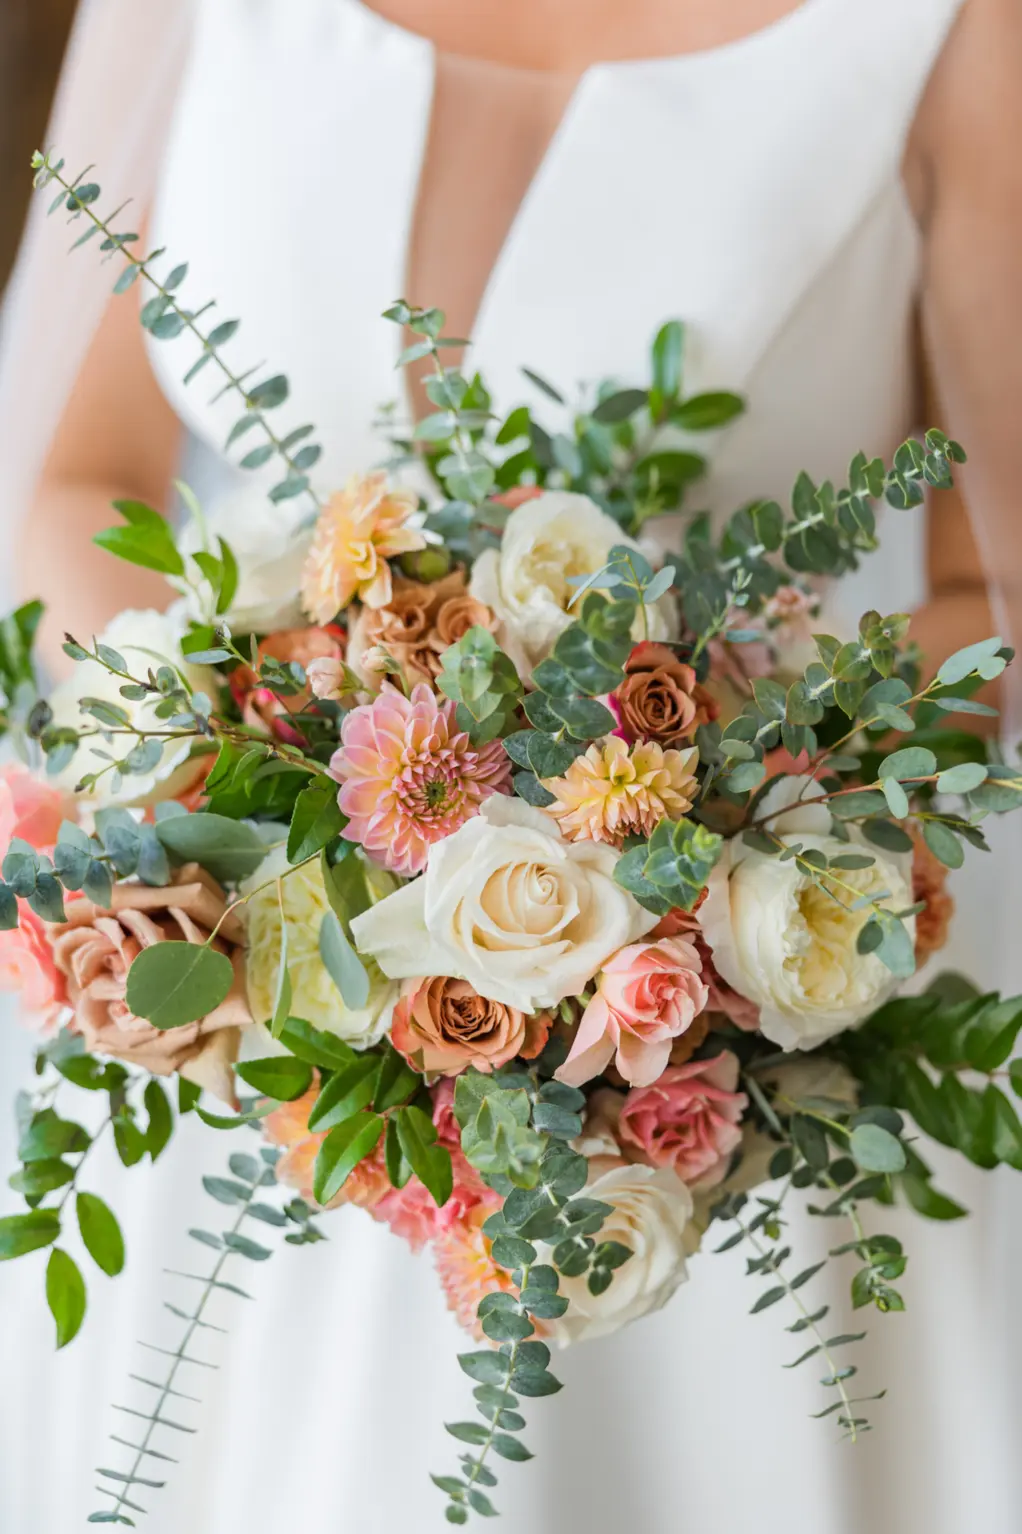 Bridal Wedding Bouquet with Yellow, Peach, Orange, and Pink Roses, Dahlia, and Eucalyptus Greenery Ideas